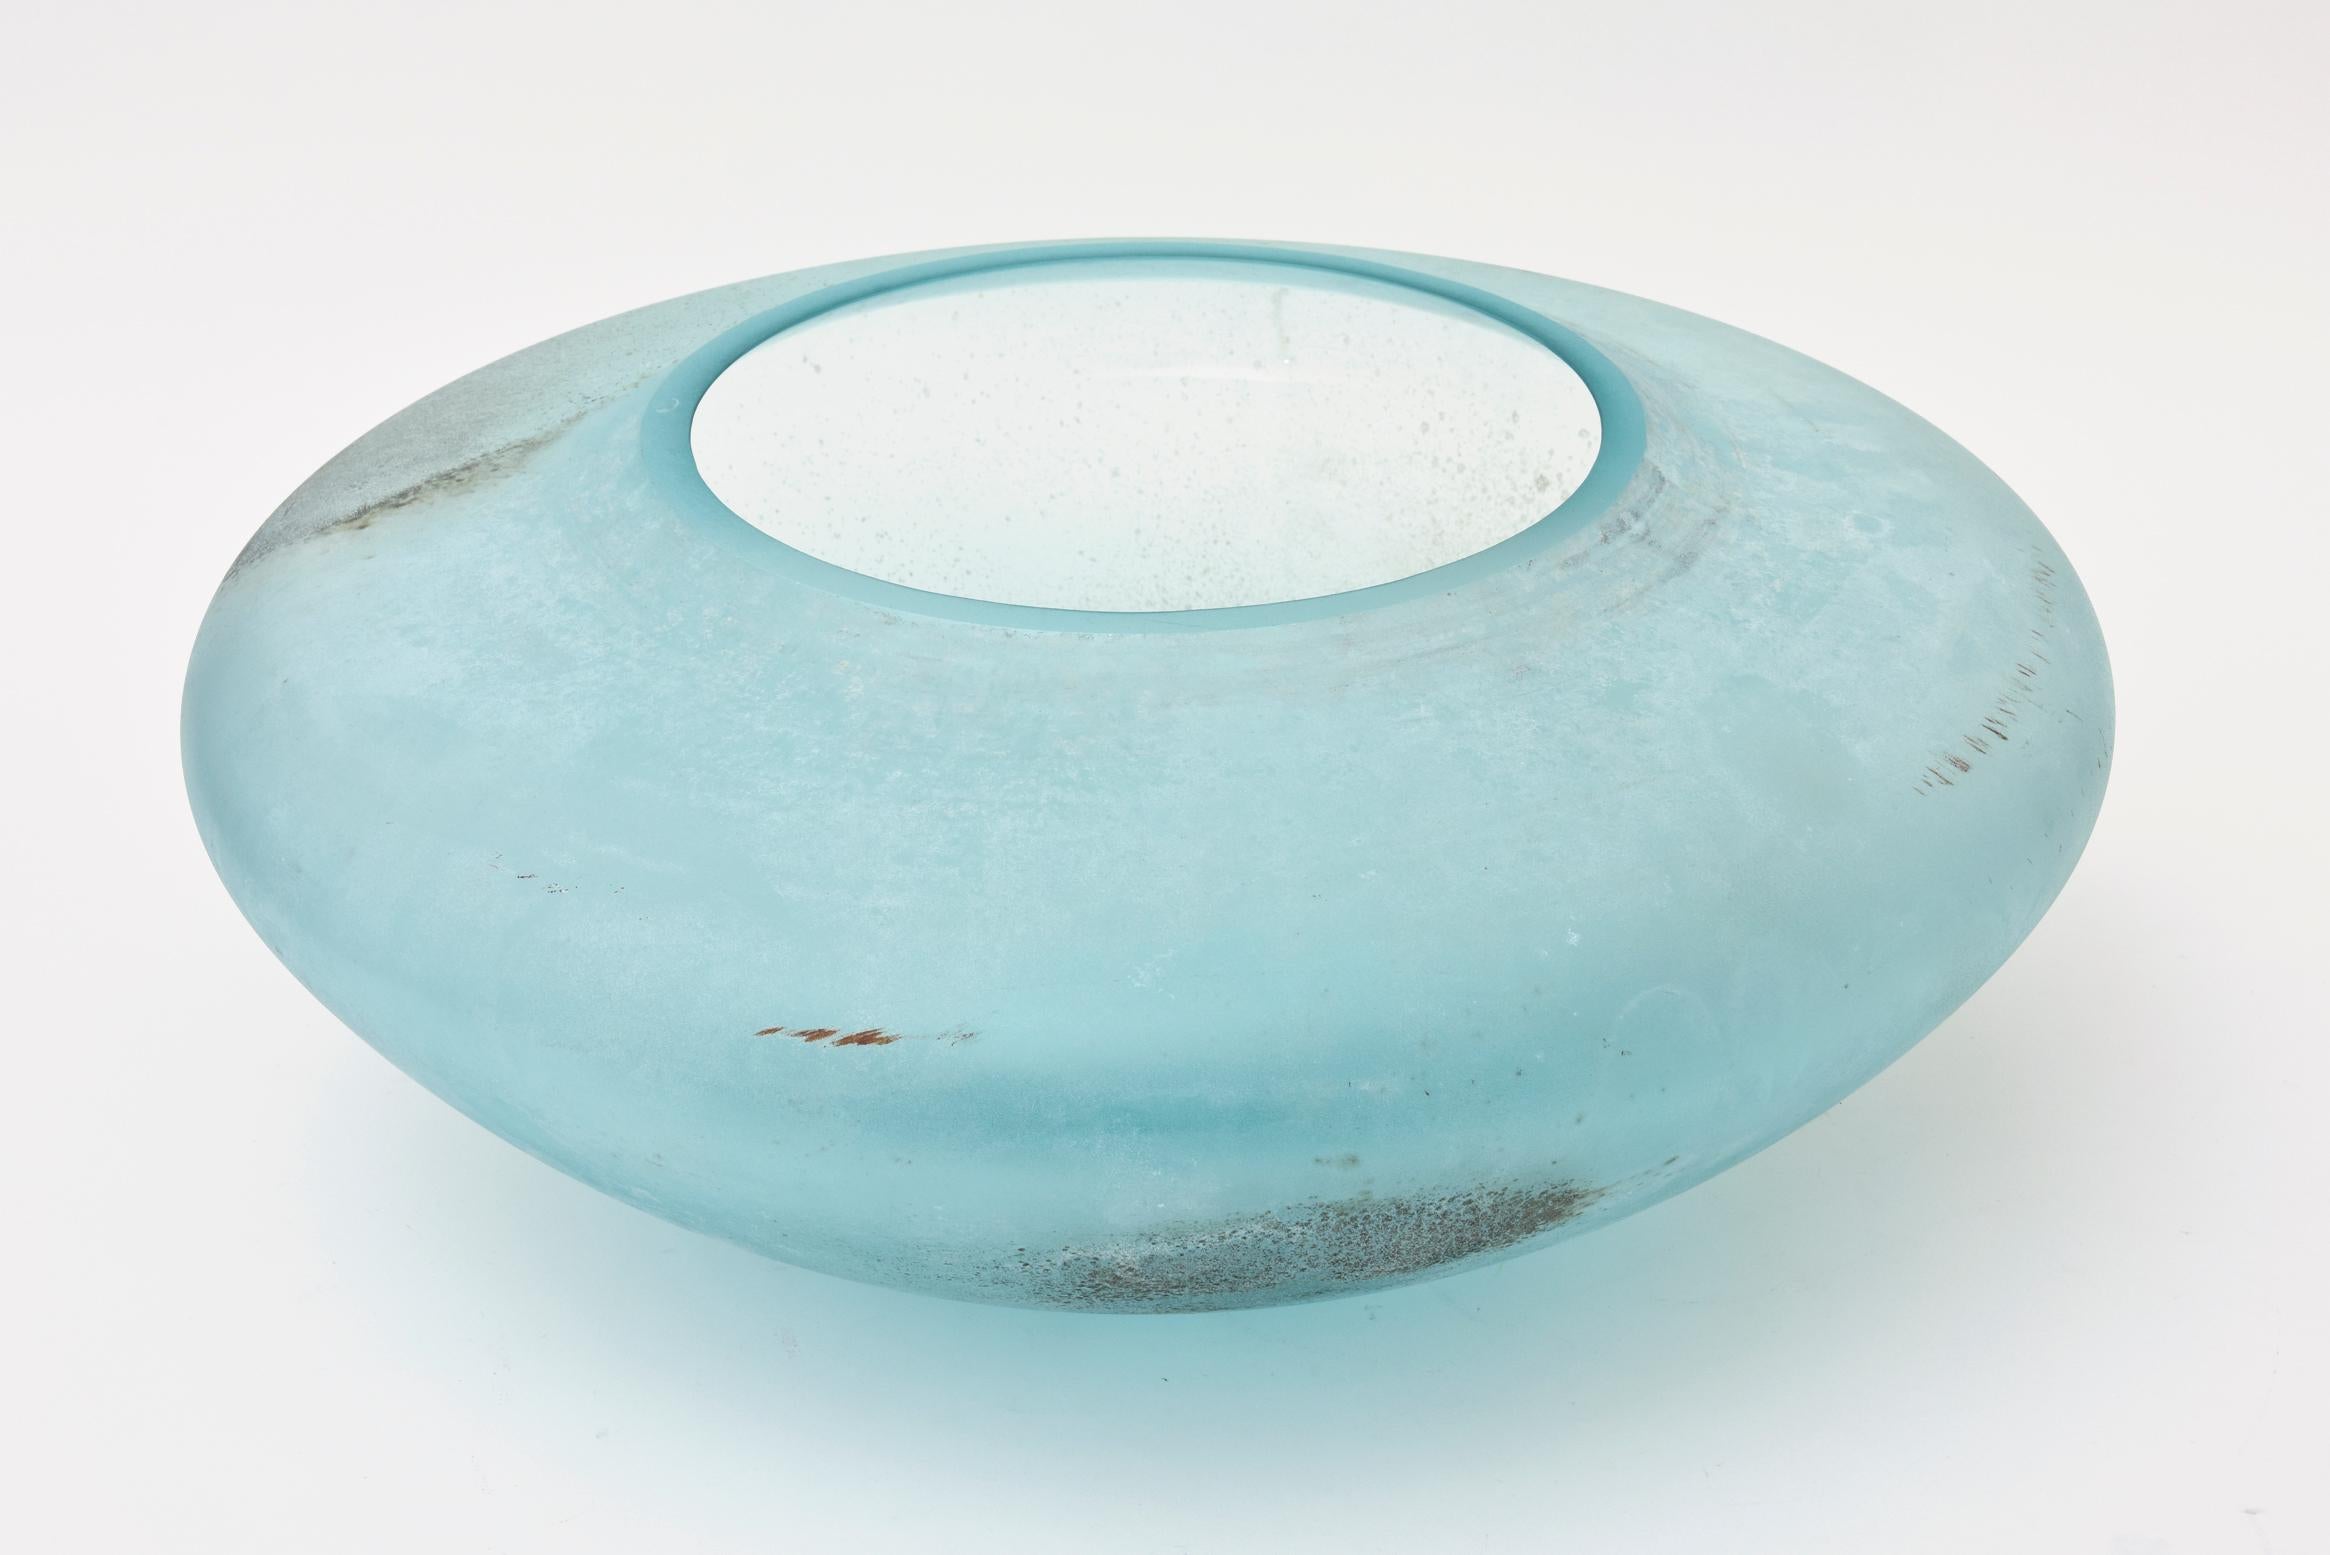 This absolutely gorgeous and monumental signed Italian Murano Cenedese sculptural hand blown glass centre piece bowl is of the scavo technique. This is an old world process of glass making. It is from the 1980s. The luscious color of the light